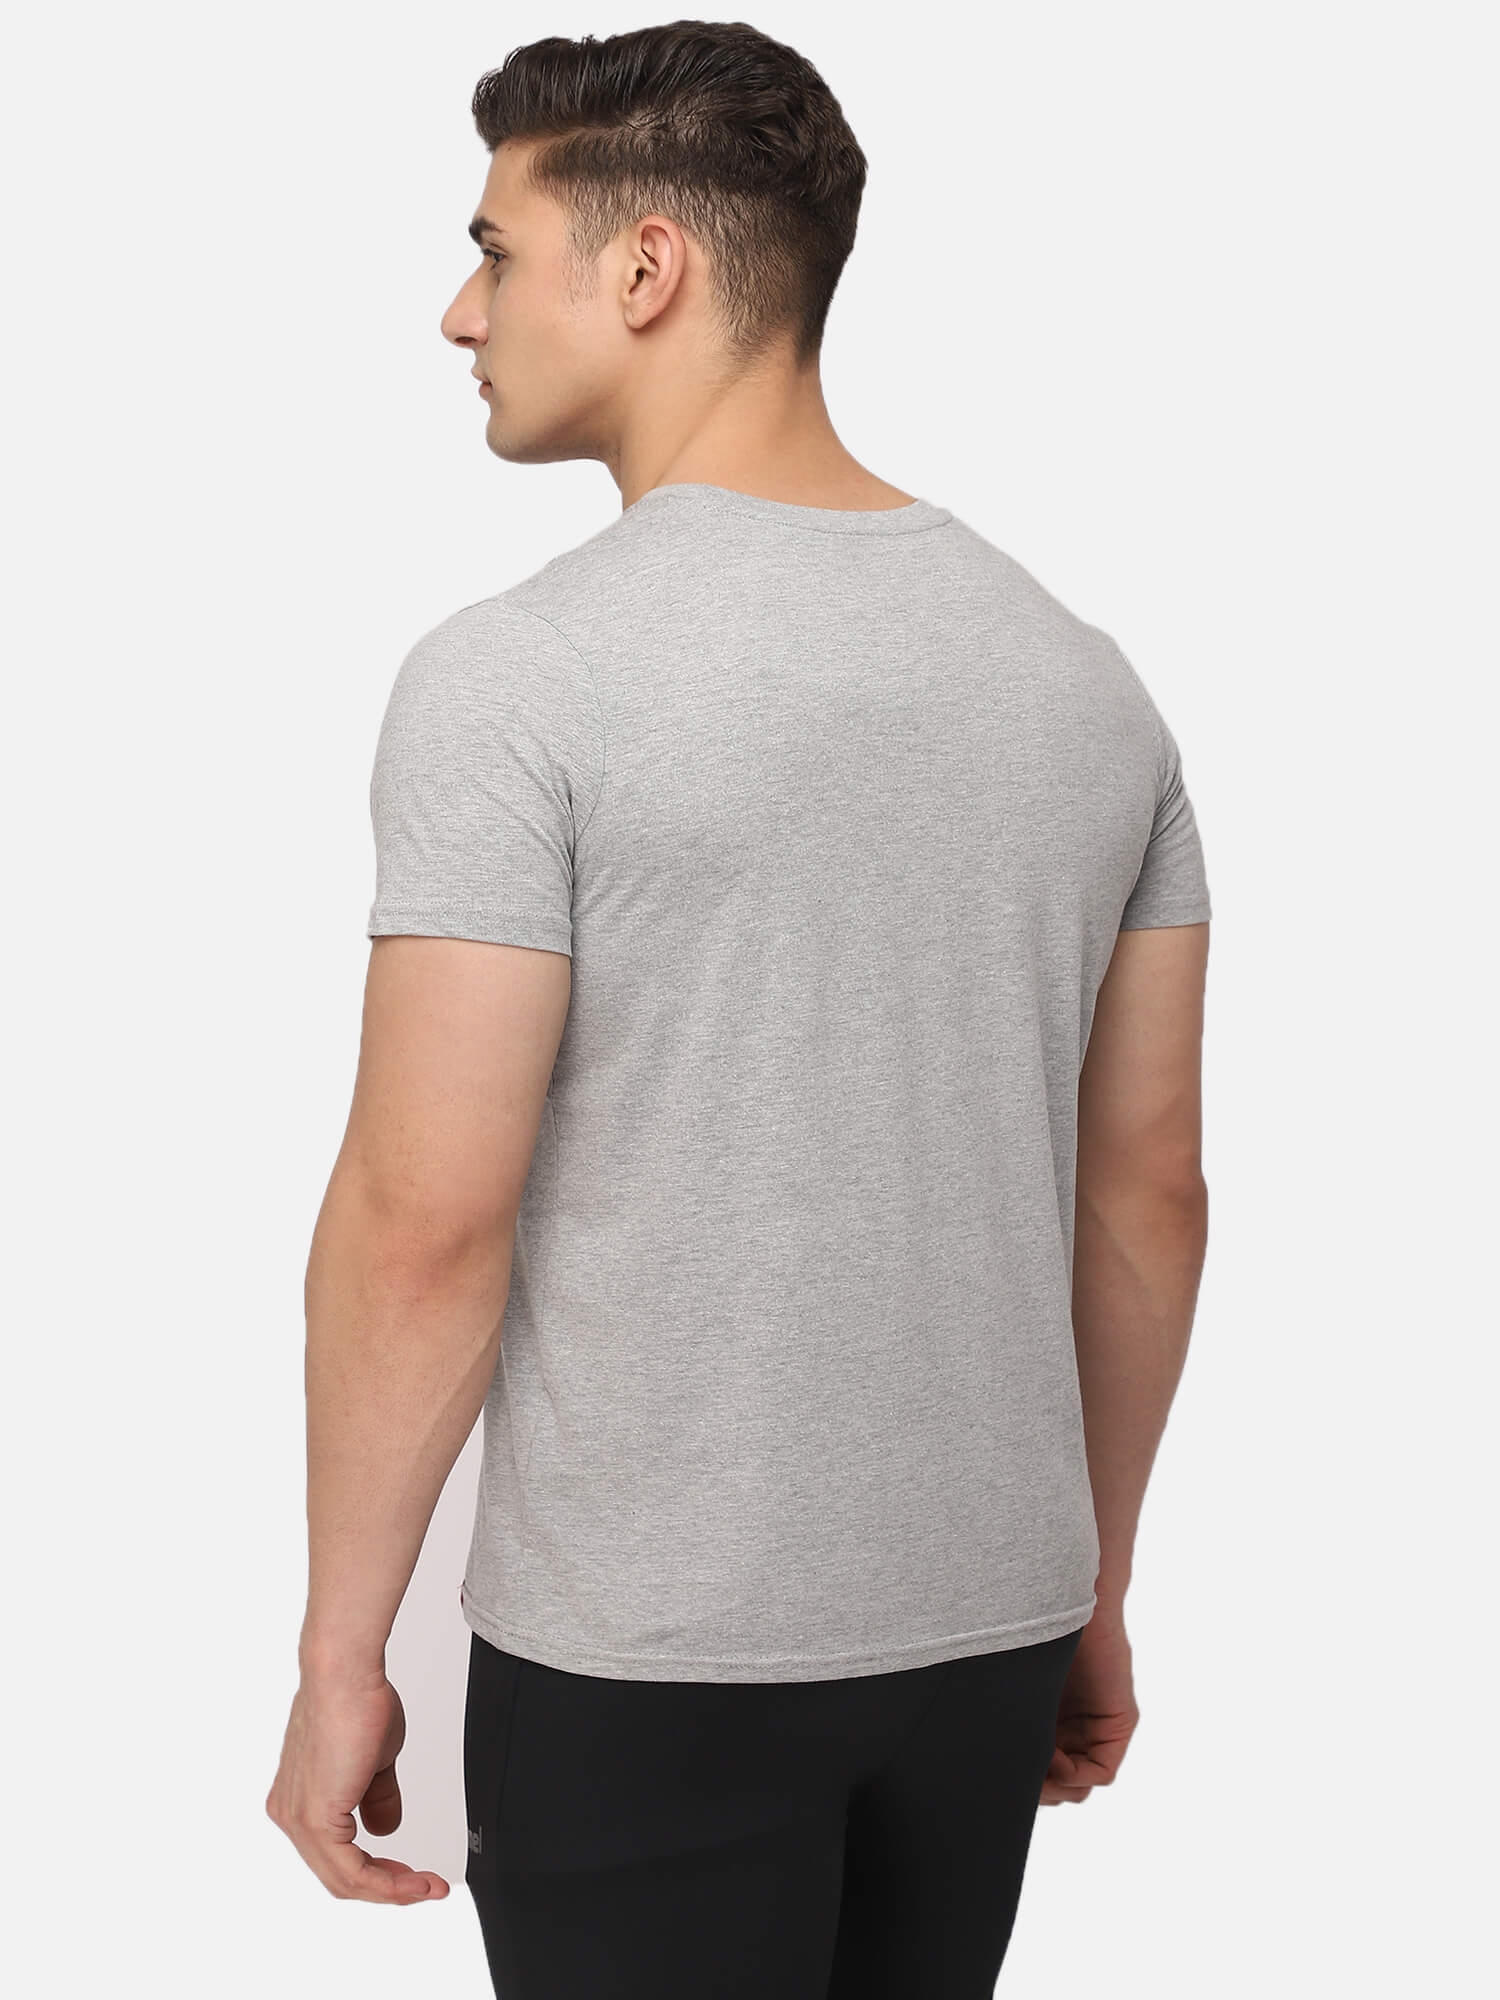 Legacy Grey T-Shirts for Men